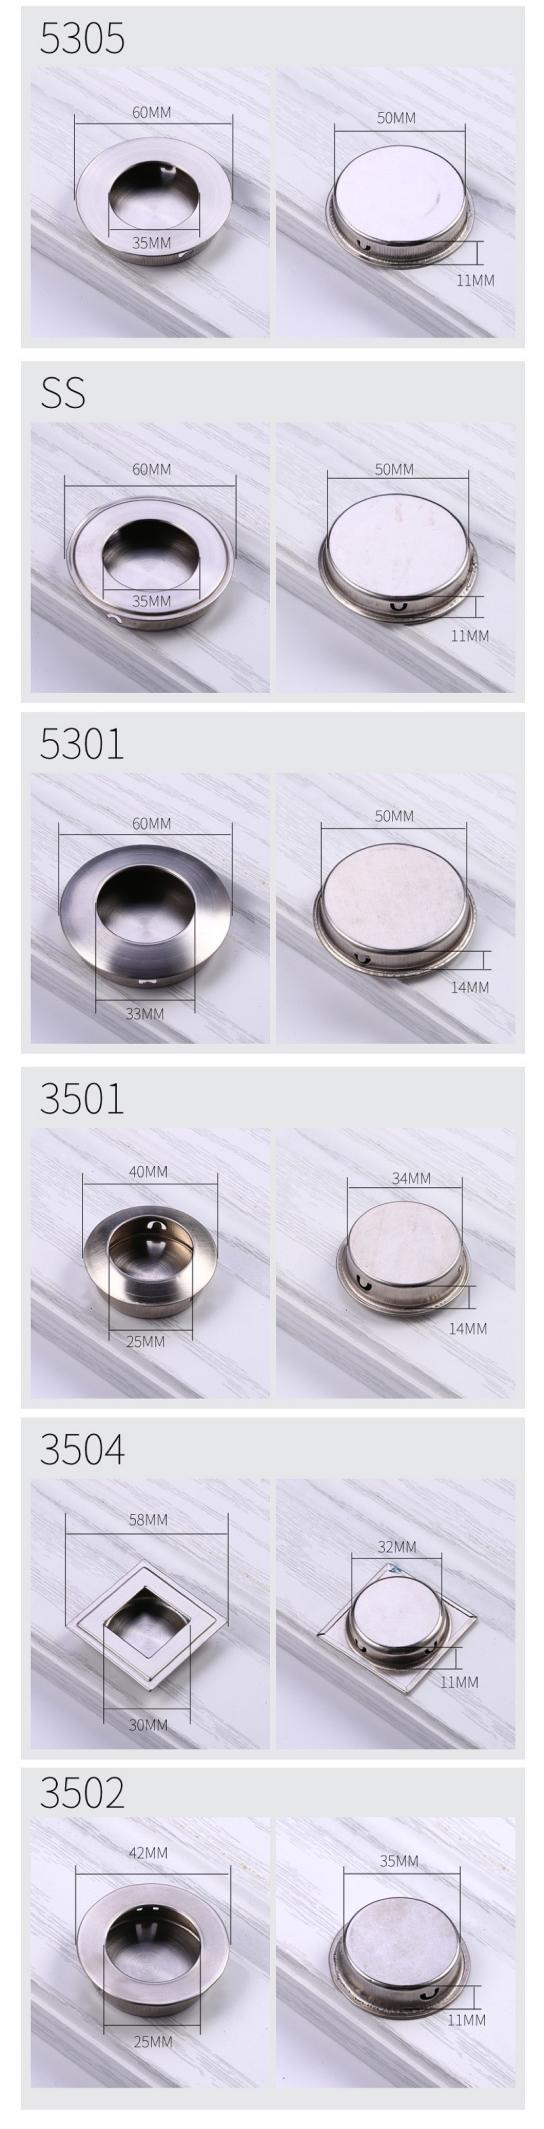 Stainless Steel Drawer Pulls